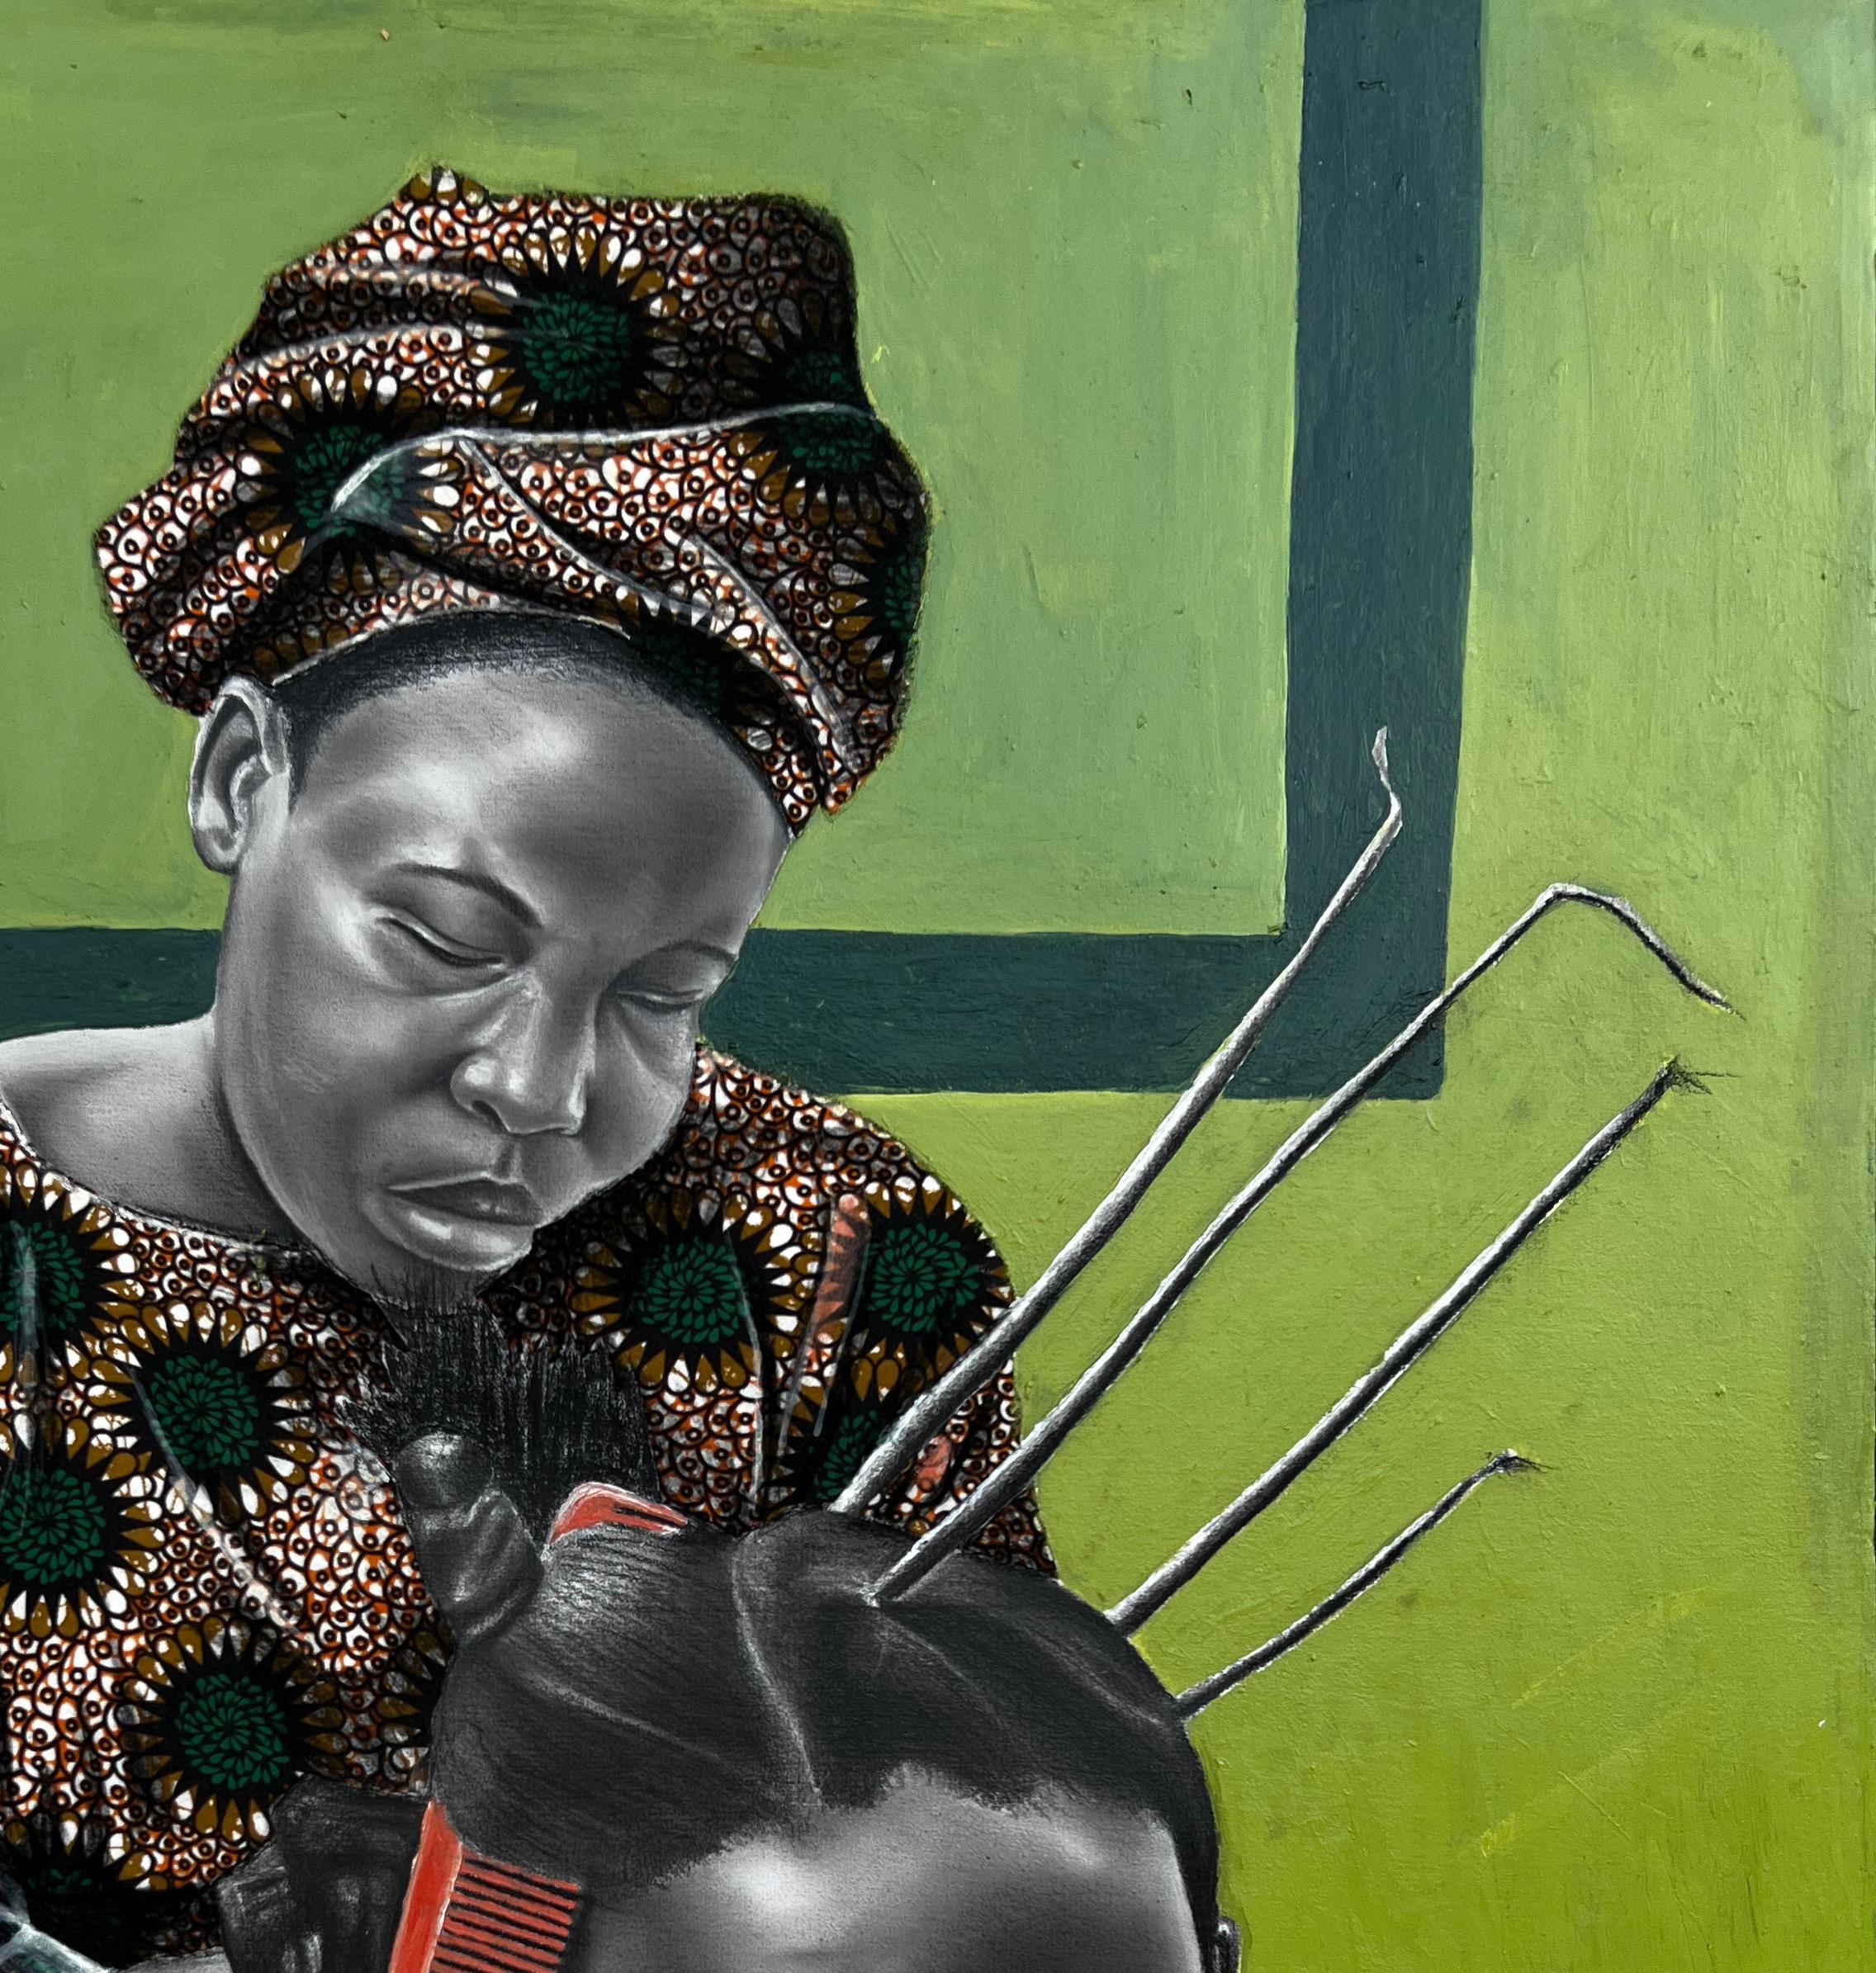 For Tomorrow's Festival  - Contemporary Painting by Ademola Clement Ajayi